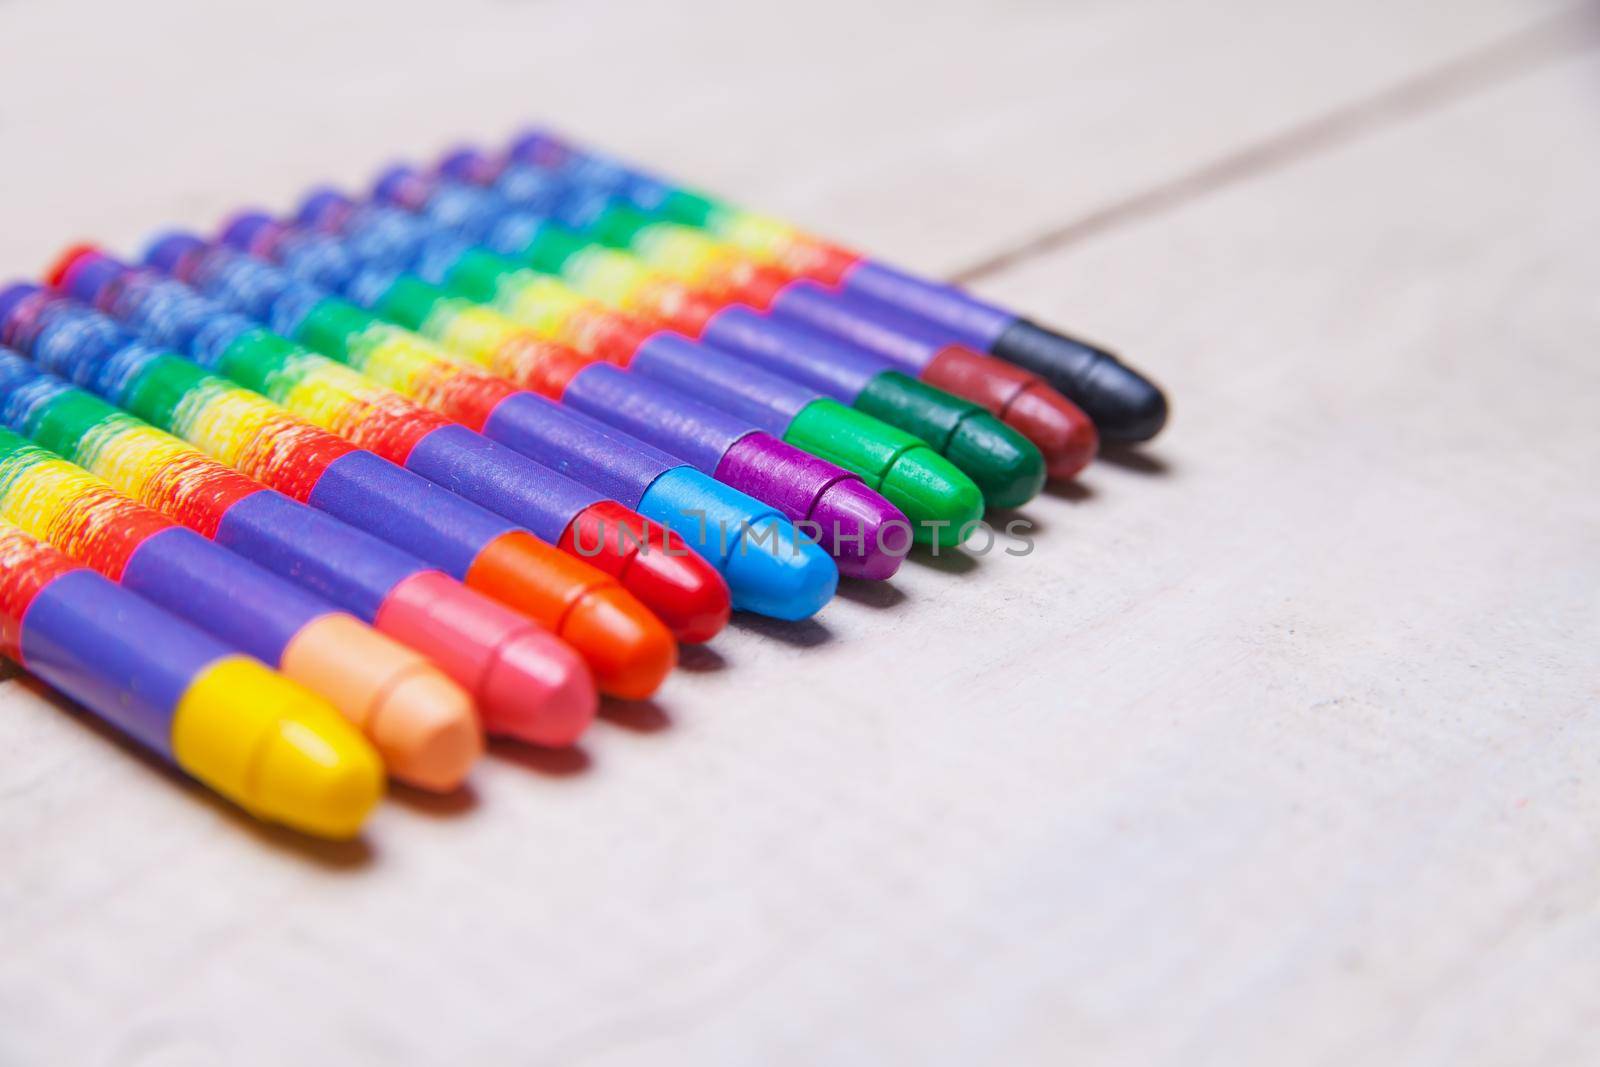 wax crayons on wood table by Julenochek